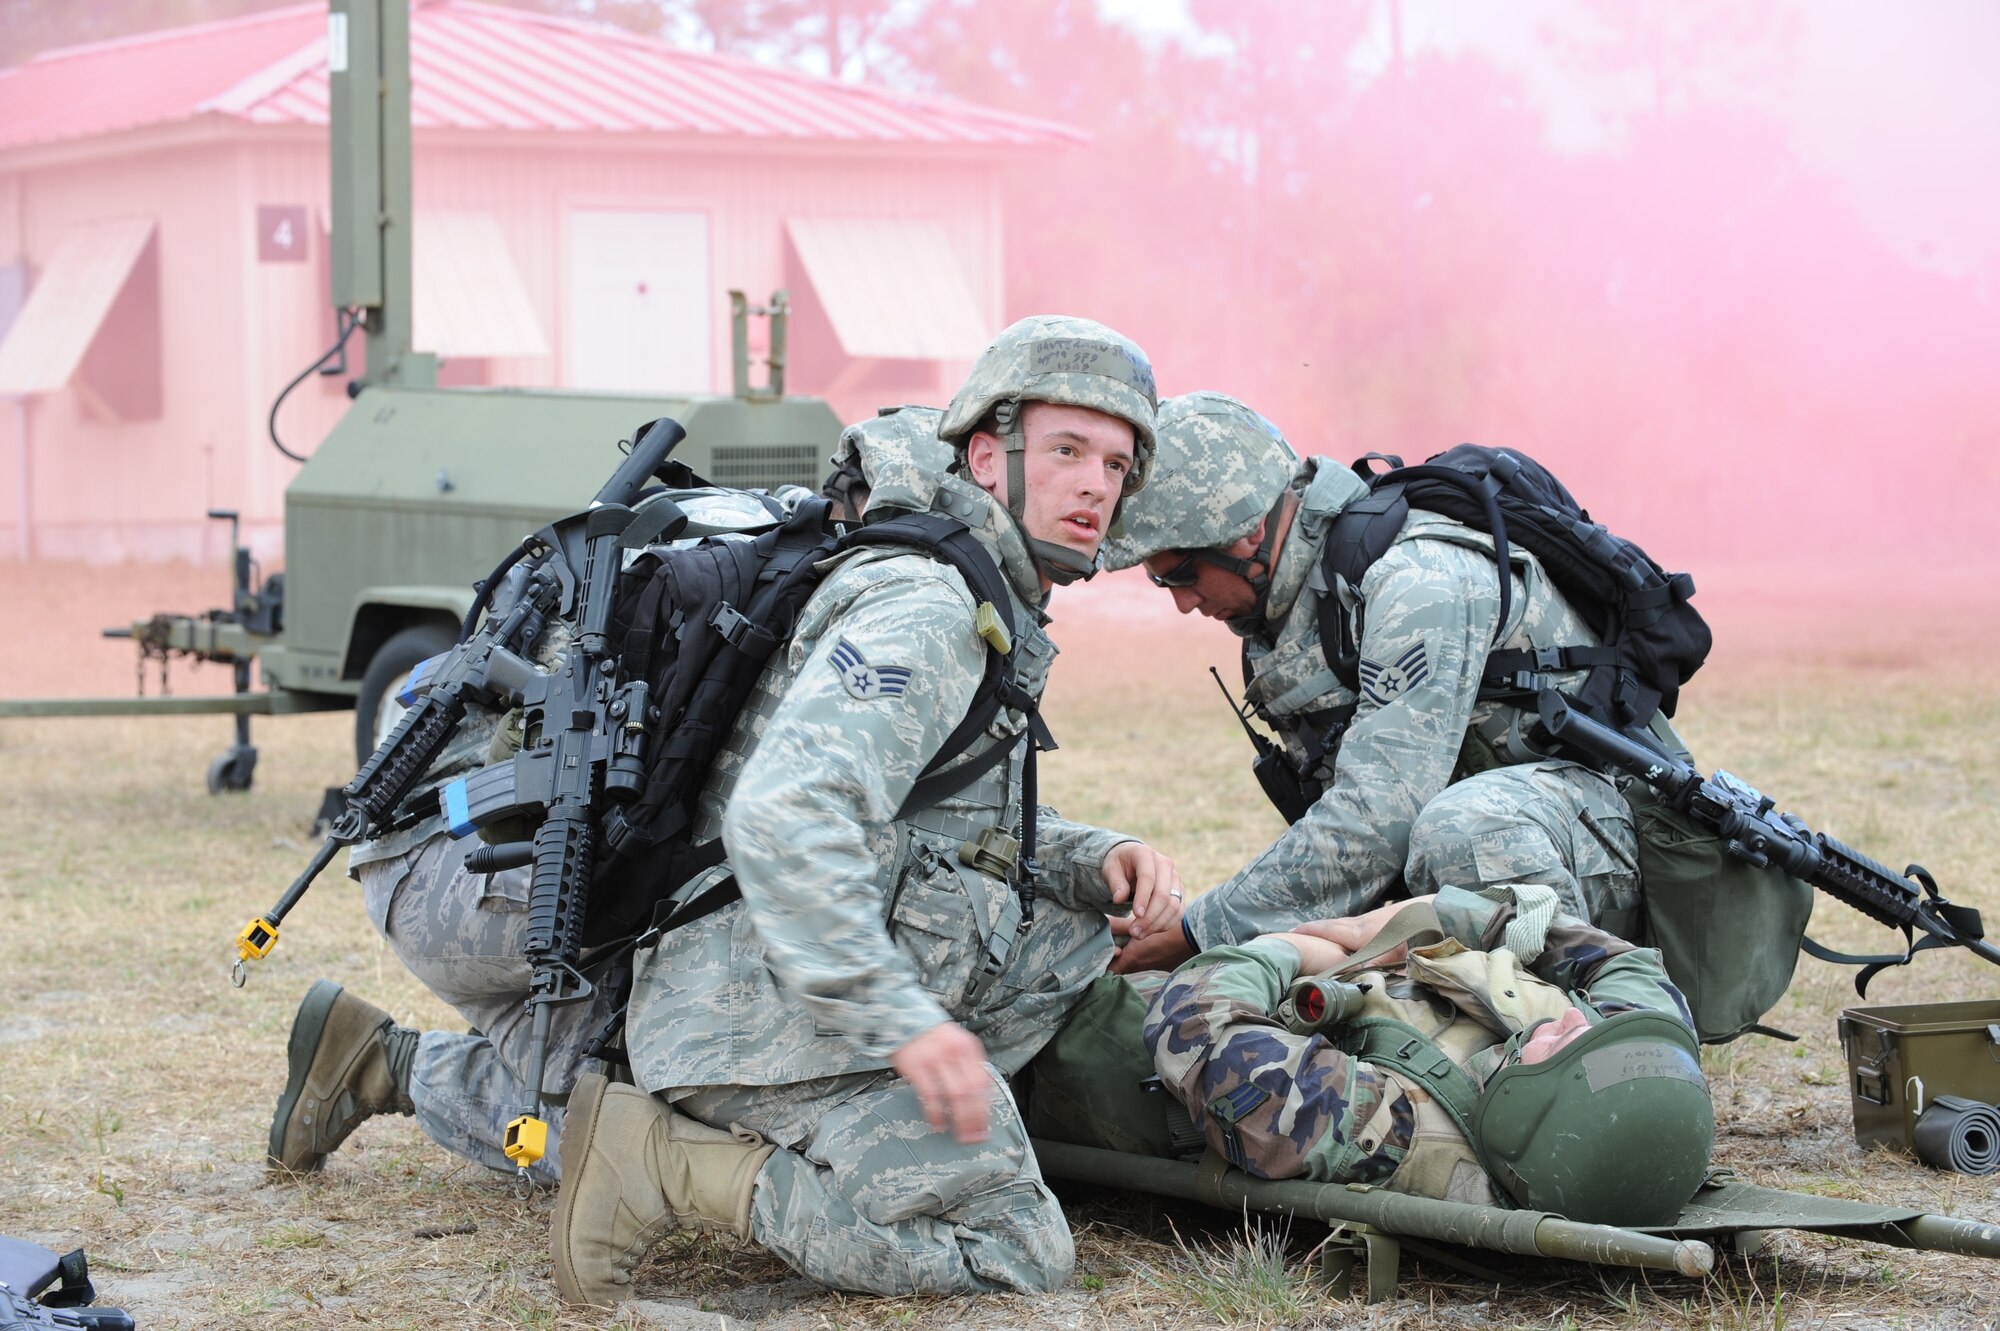 Members of the 45th Security Forces Squadron perform Self-Aid and Buddy Care to a wounded member after a simulated attack with smoke still visible at the Malabar Training Annex during the recent weeklong Operation Ocean Breeze deployment exercise. (U.S. Air Force photo/John Connell)